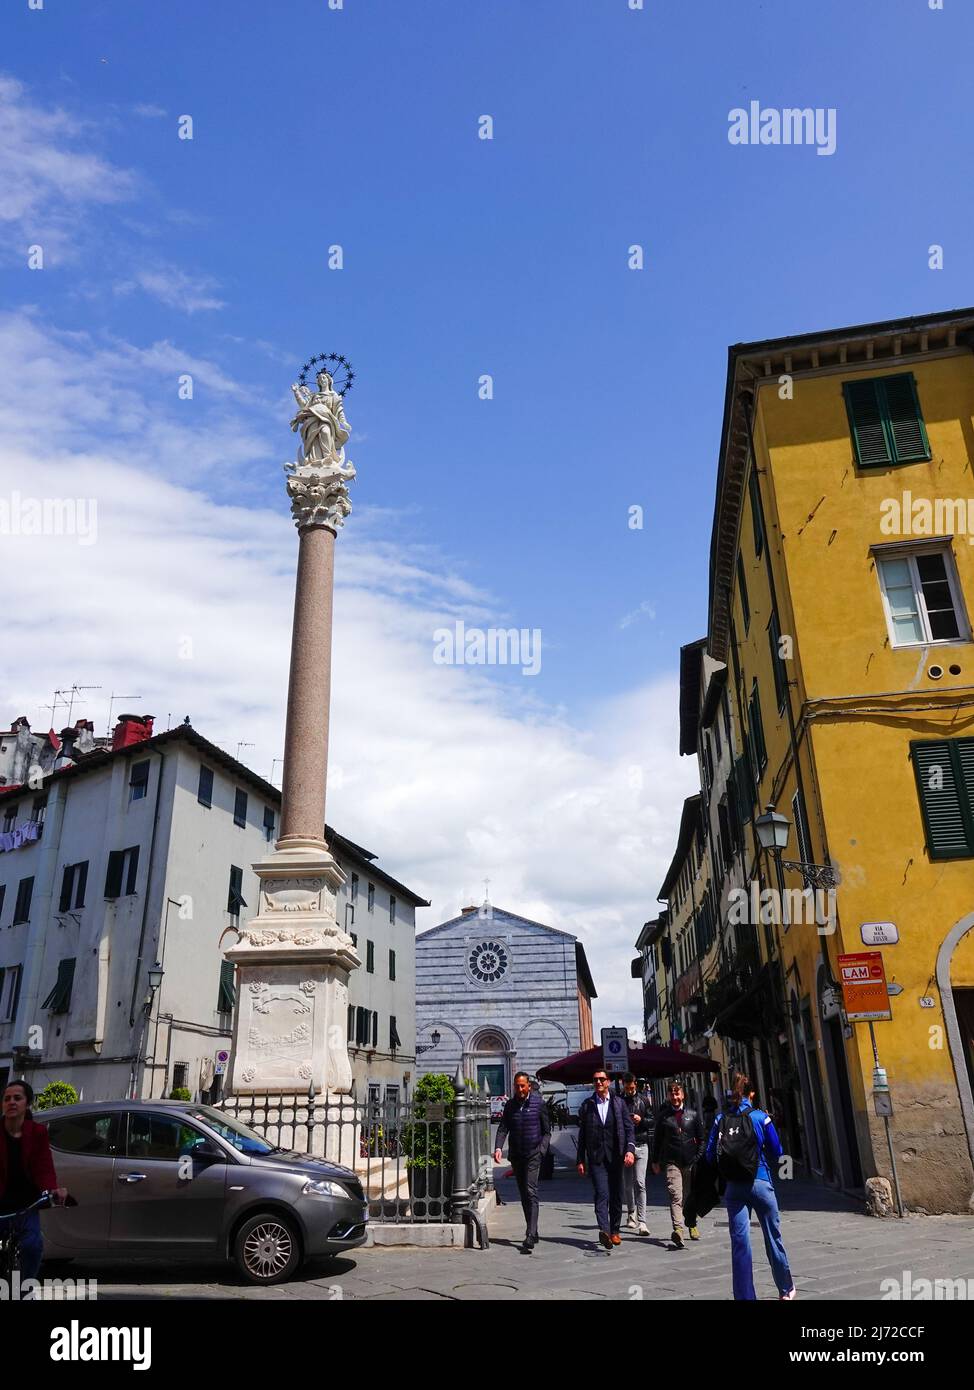 Statue of the Madonna of Stellario on a column, by sculptor Giovanni Lazzoni, Via del Fosso, in front of the Piazza San Francesco, Lucca, Italy. Stock Photo